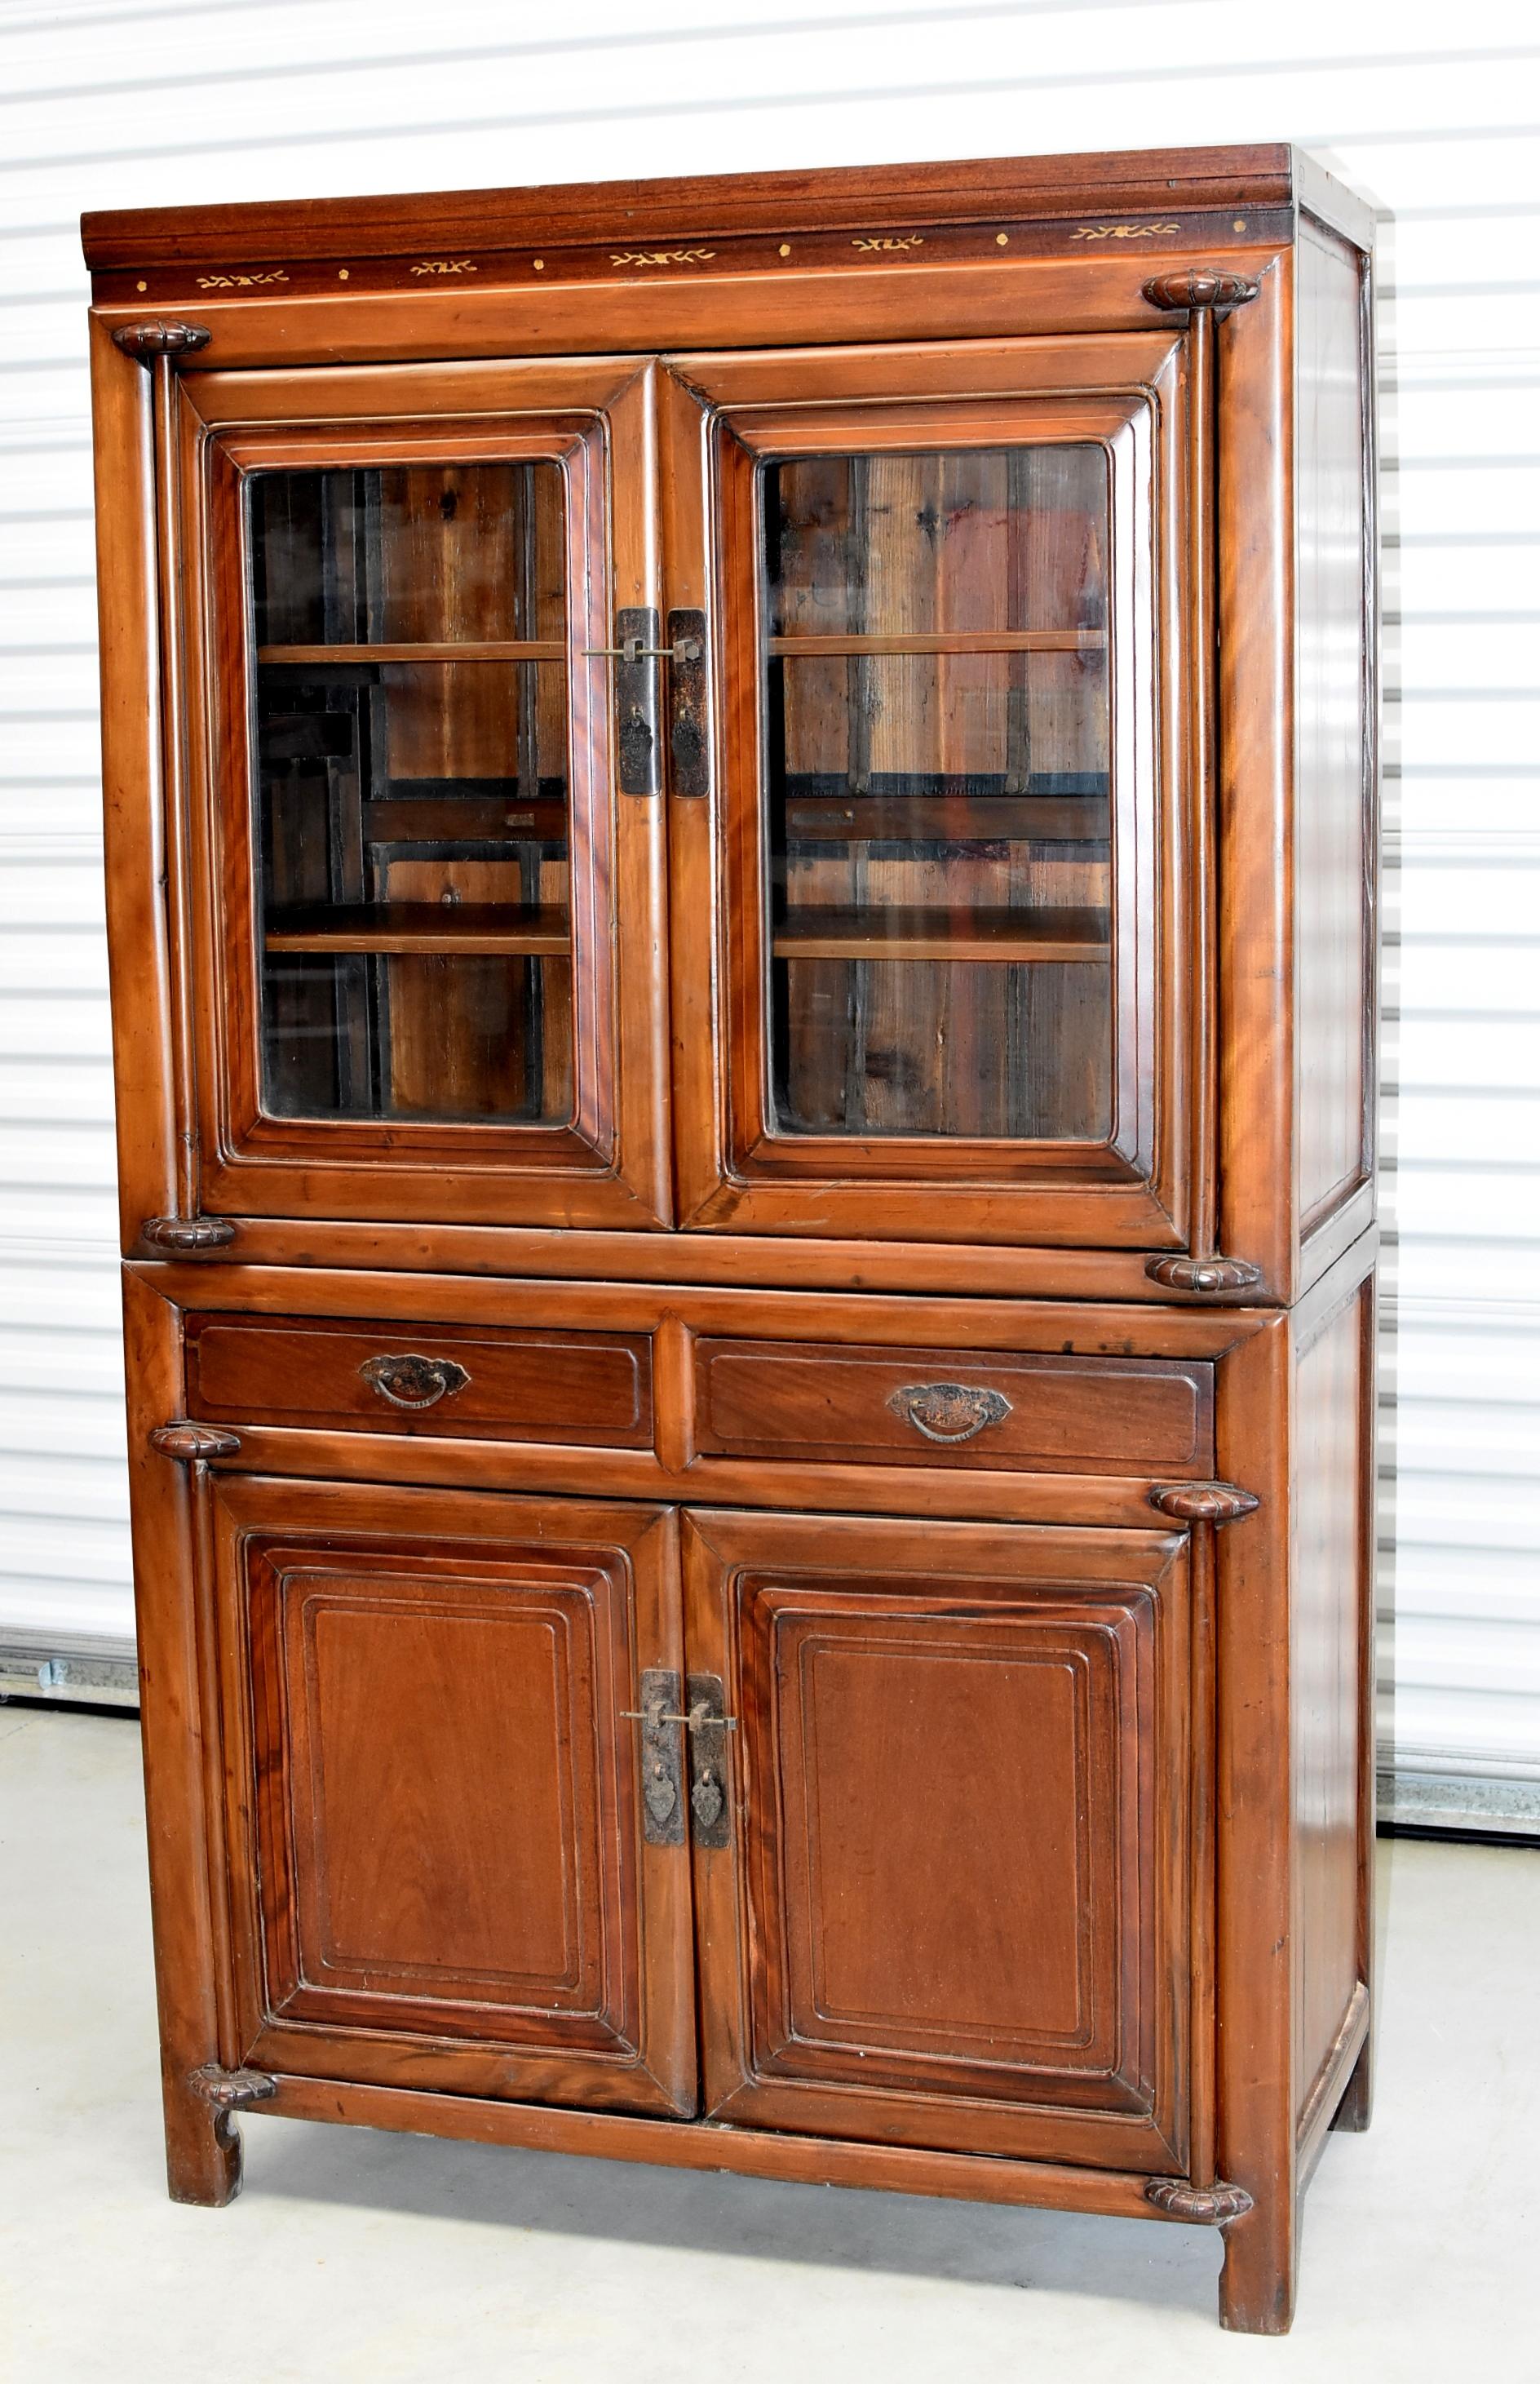 A Ming style solid wood cabinet with glass doors and removable shelves from the Ning Bo vernacular culture. Solid single panels make the door and drawer fronts. Two full length drawers provide additional storage. Carved thin lines reflect Ming